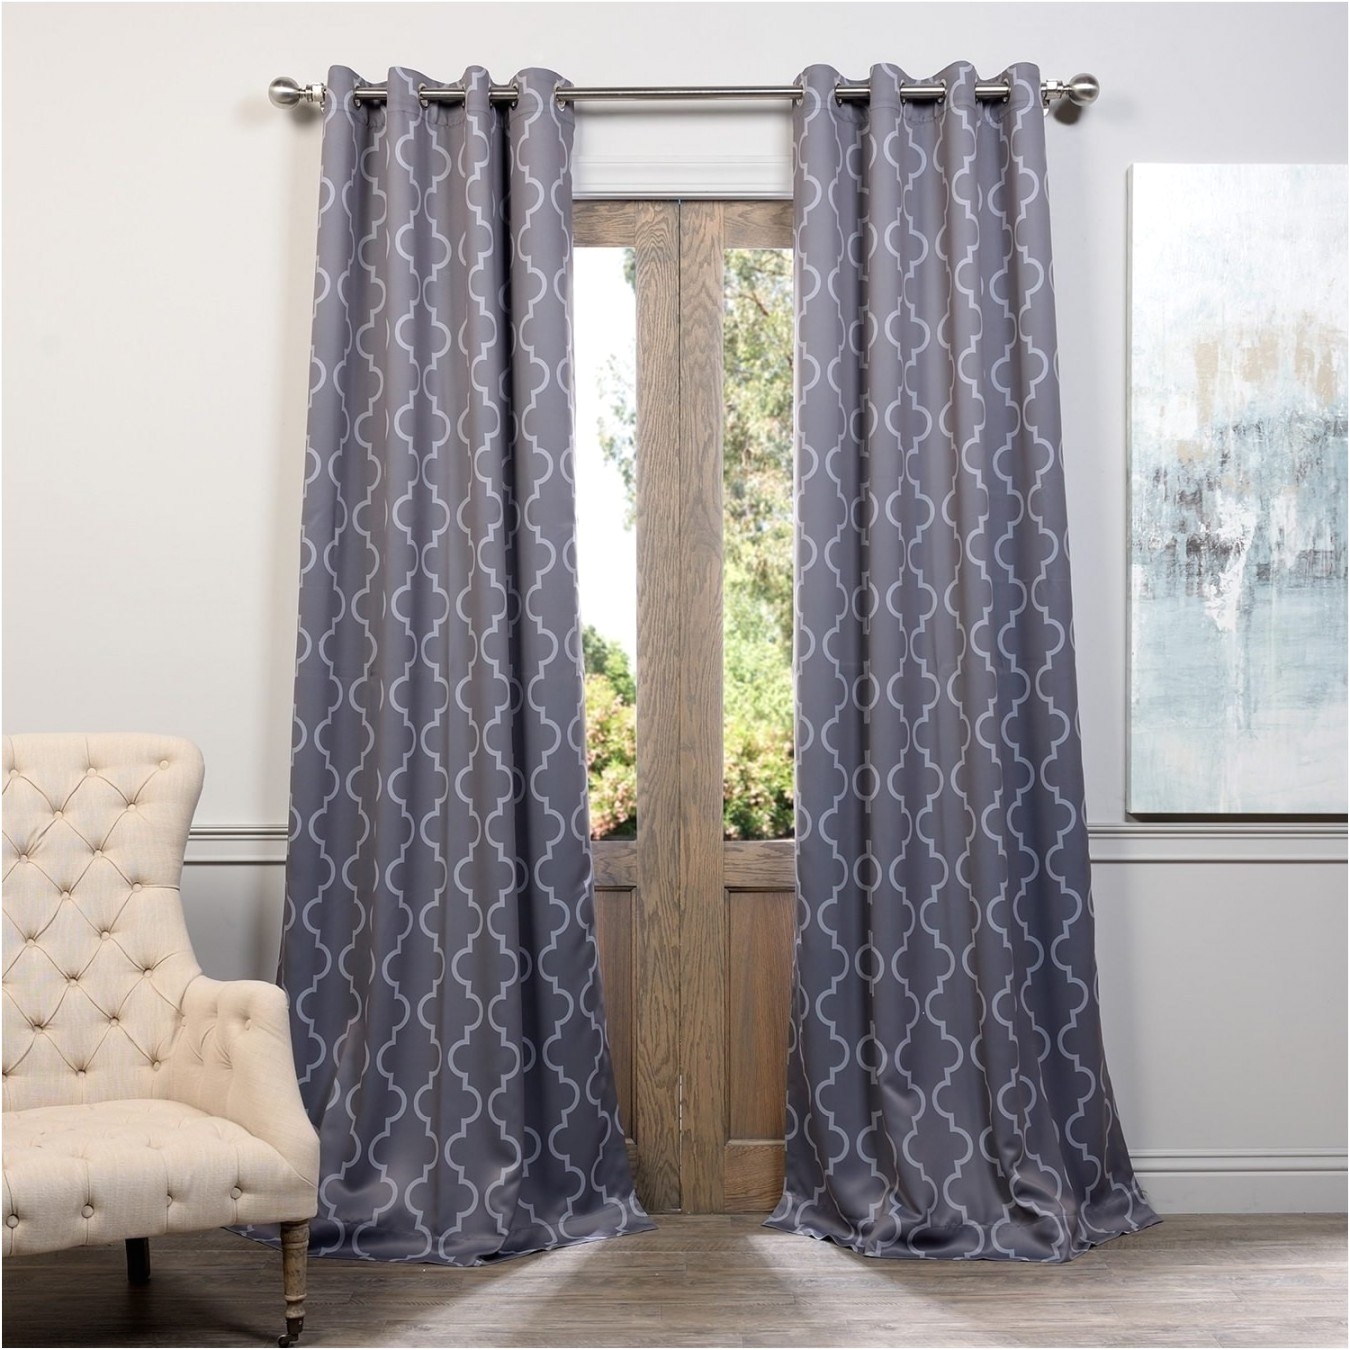 96 inch grey moroccan curtains panel pair set steel gray